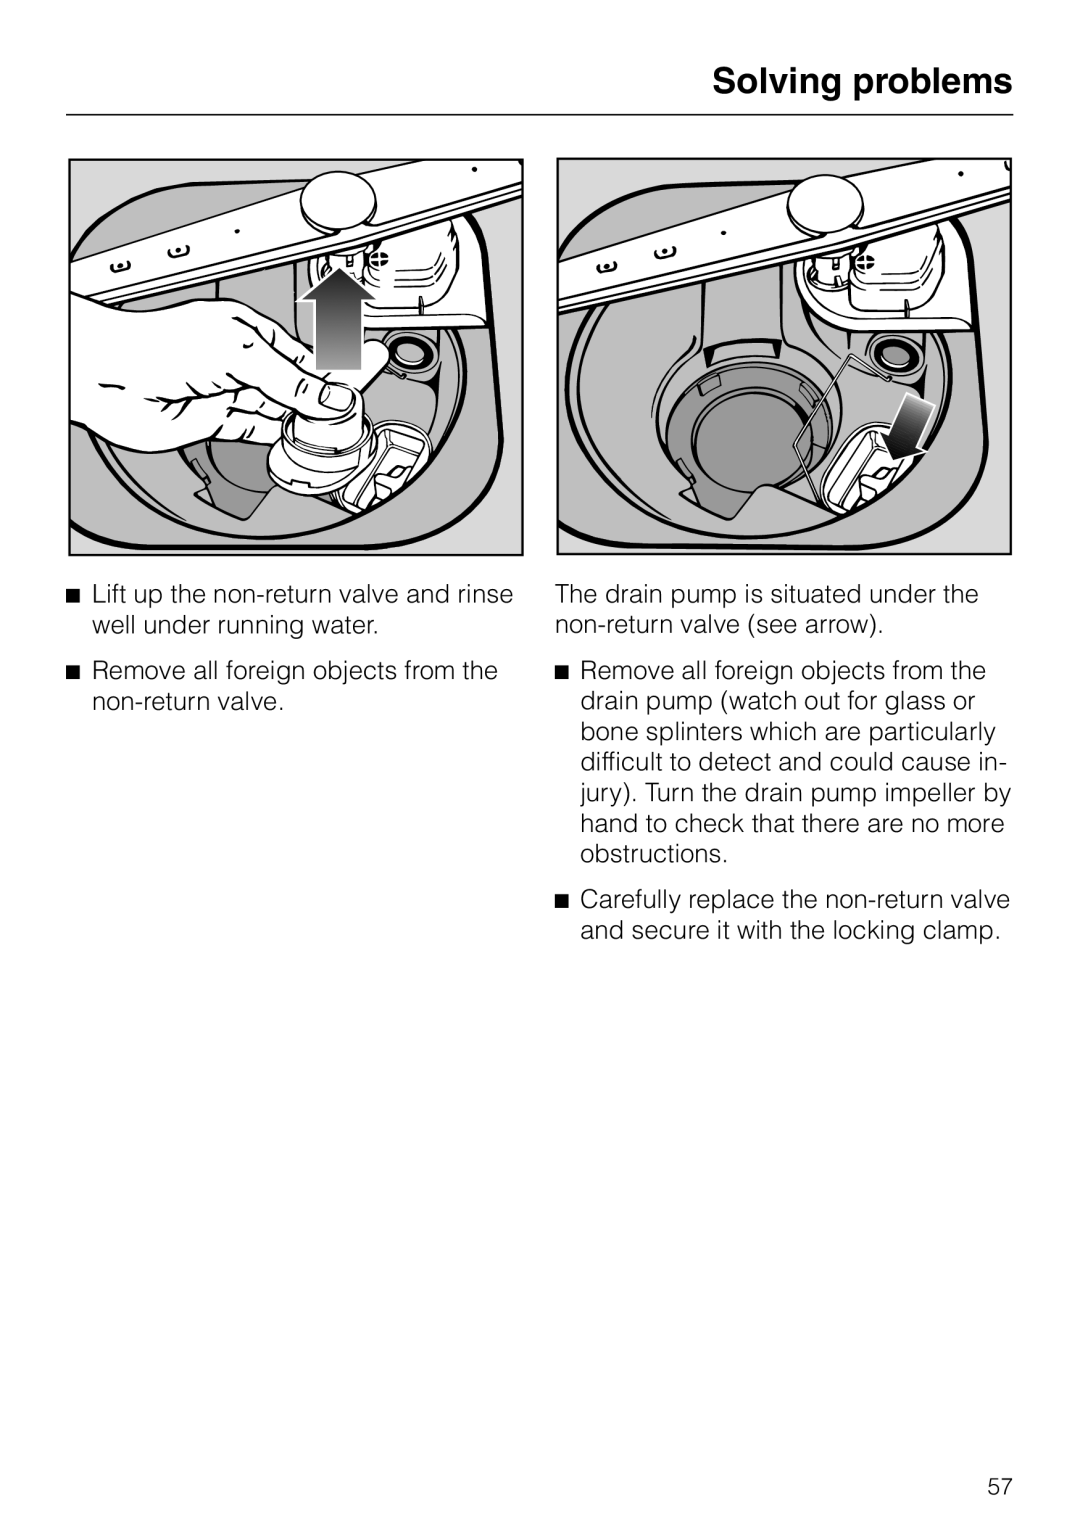 Miele G 6XX, G 8XX operating instructions Solving problems, Lift up the non-return valve and rinse well under running water 